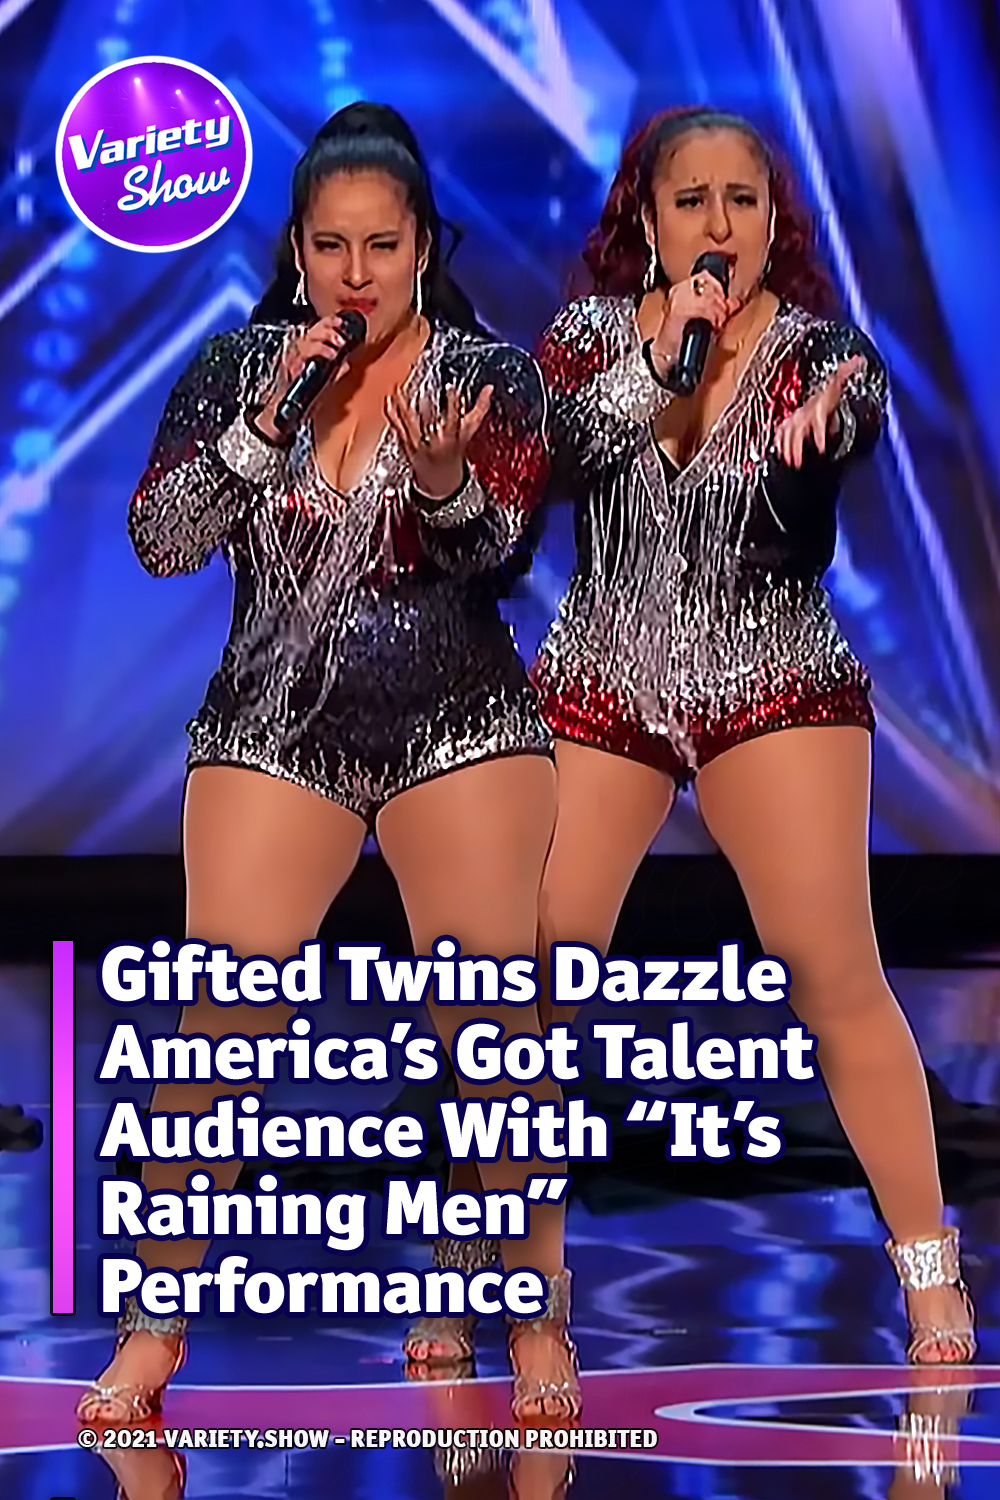 Gifted Twins Dazzle America’s Got Talent Audience With “It’s Raining Men” Performance